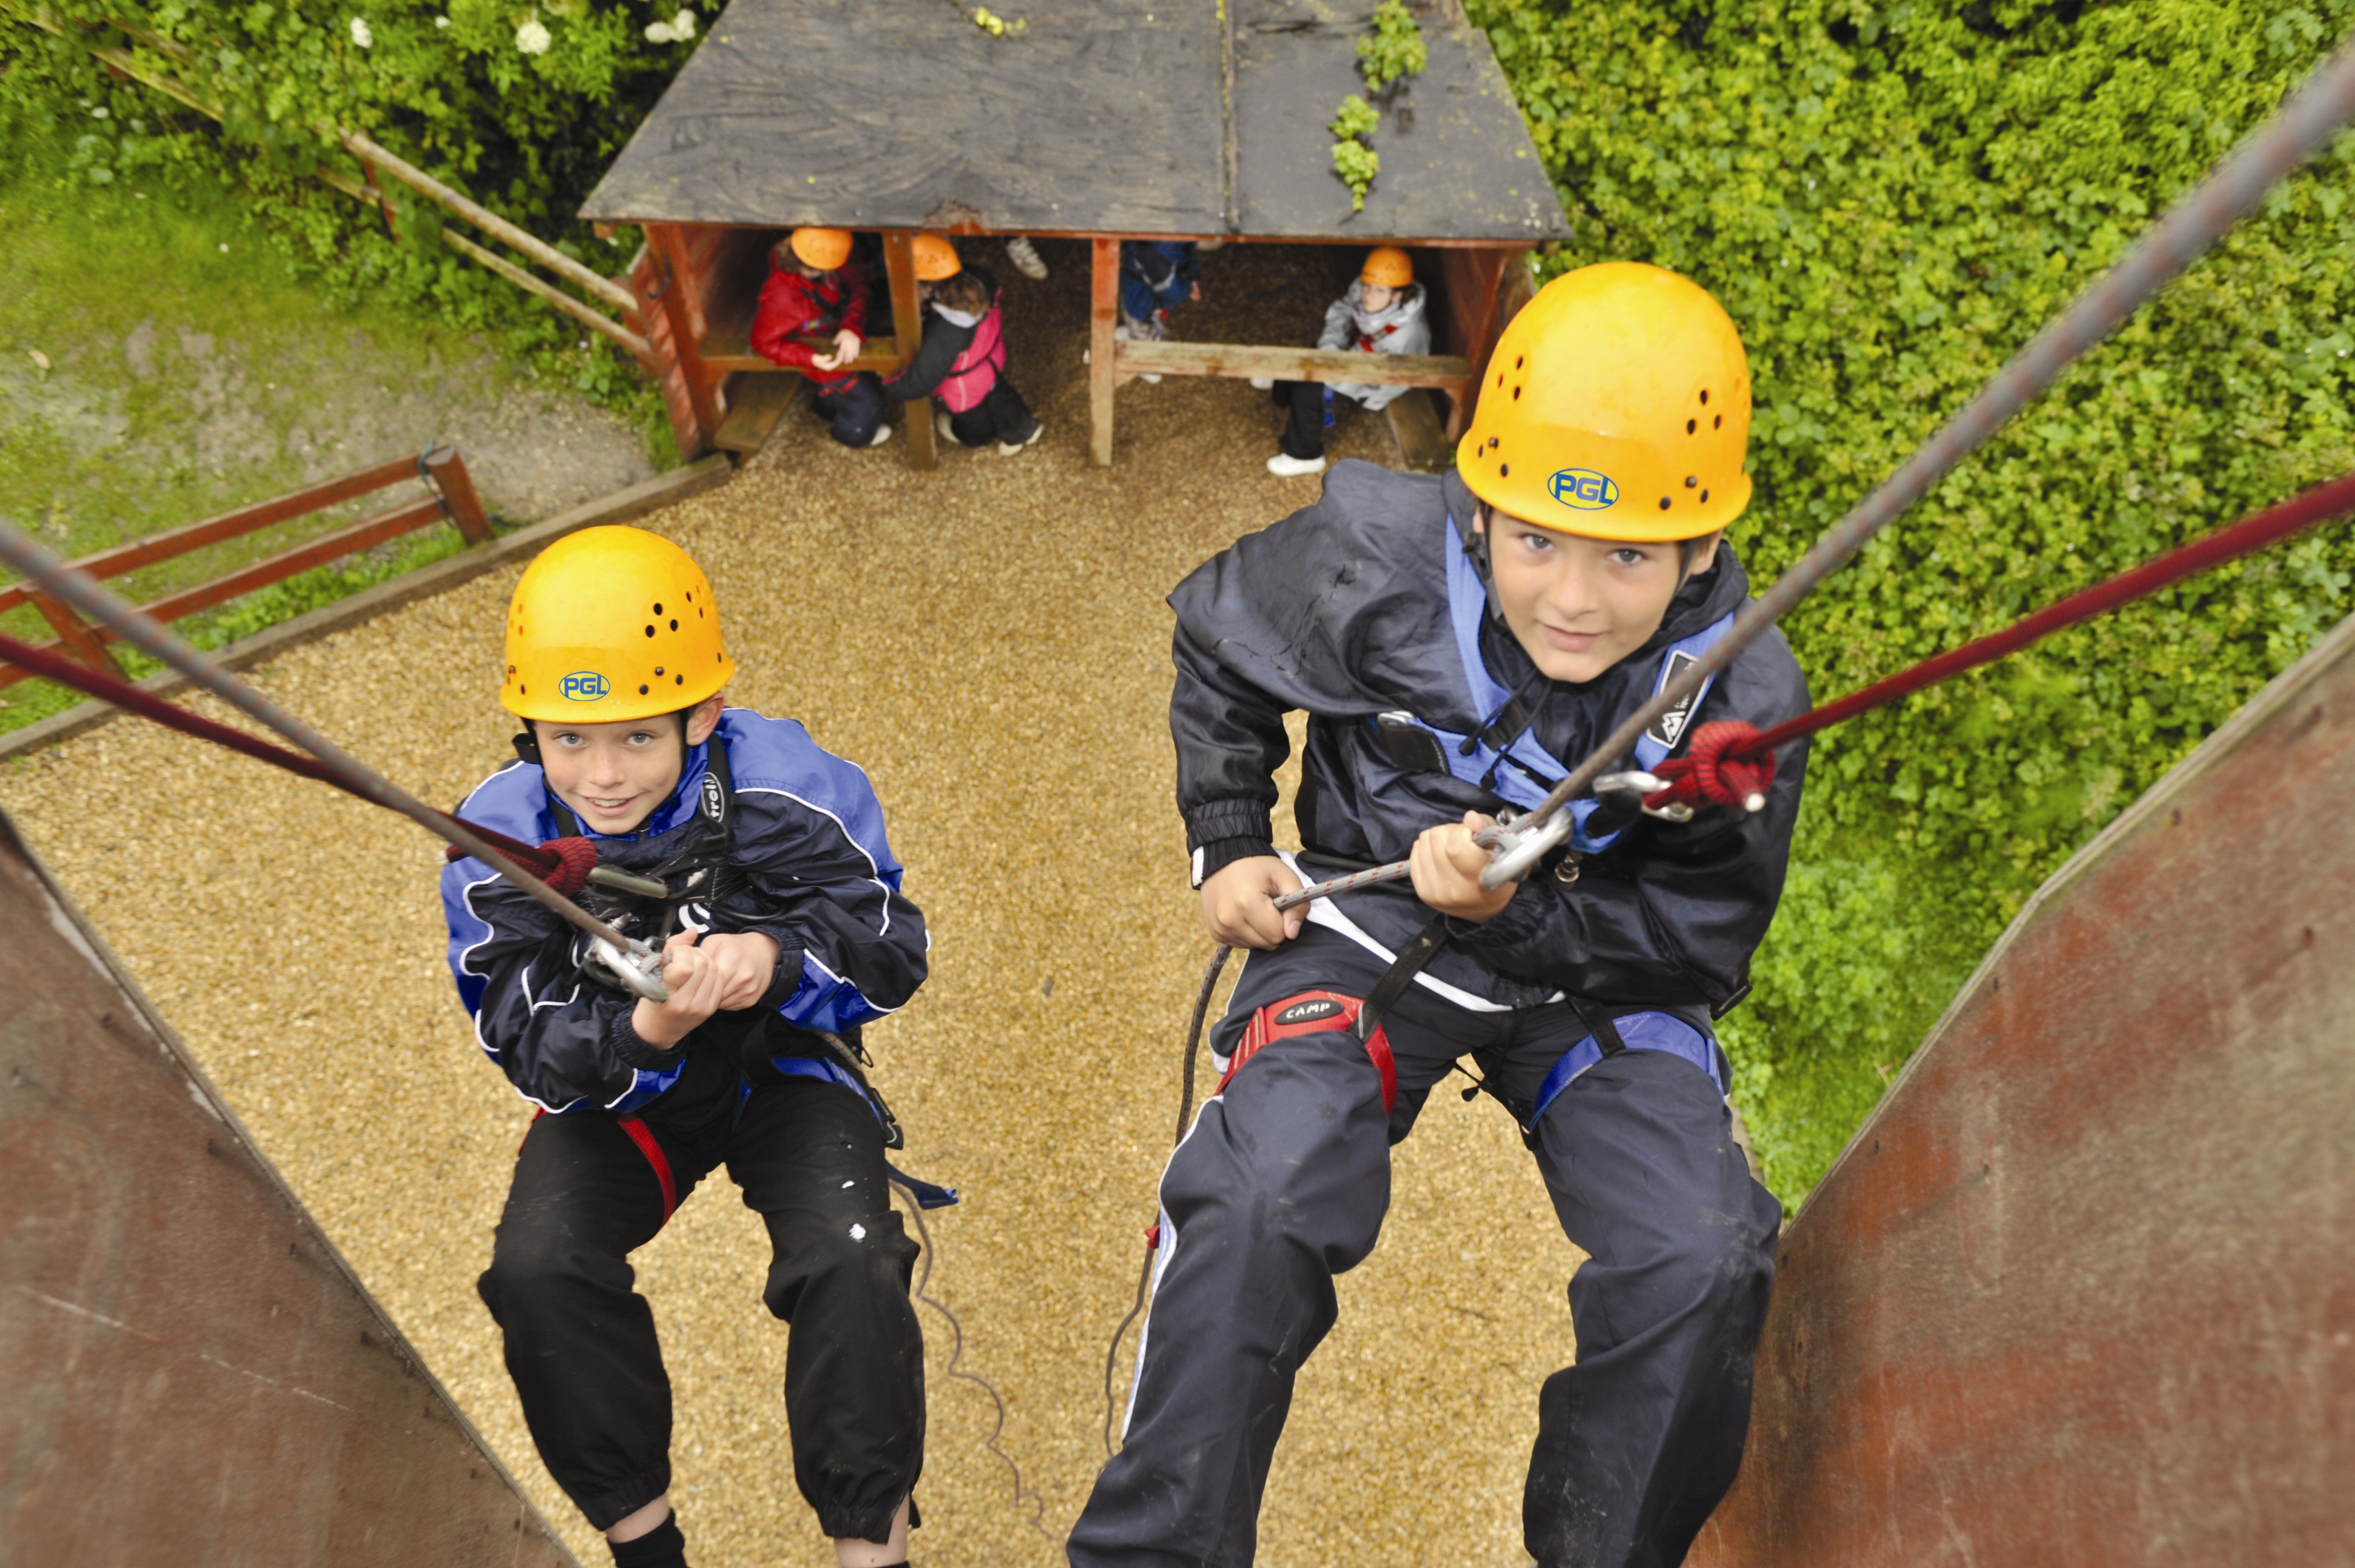 PGL abseiling